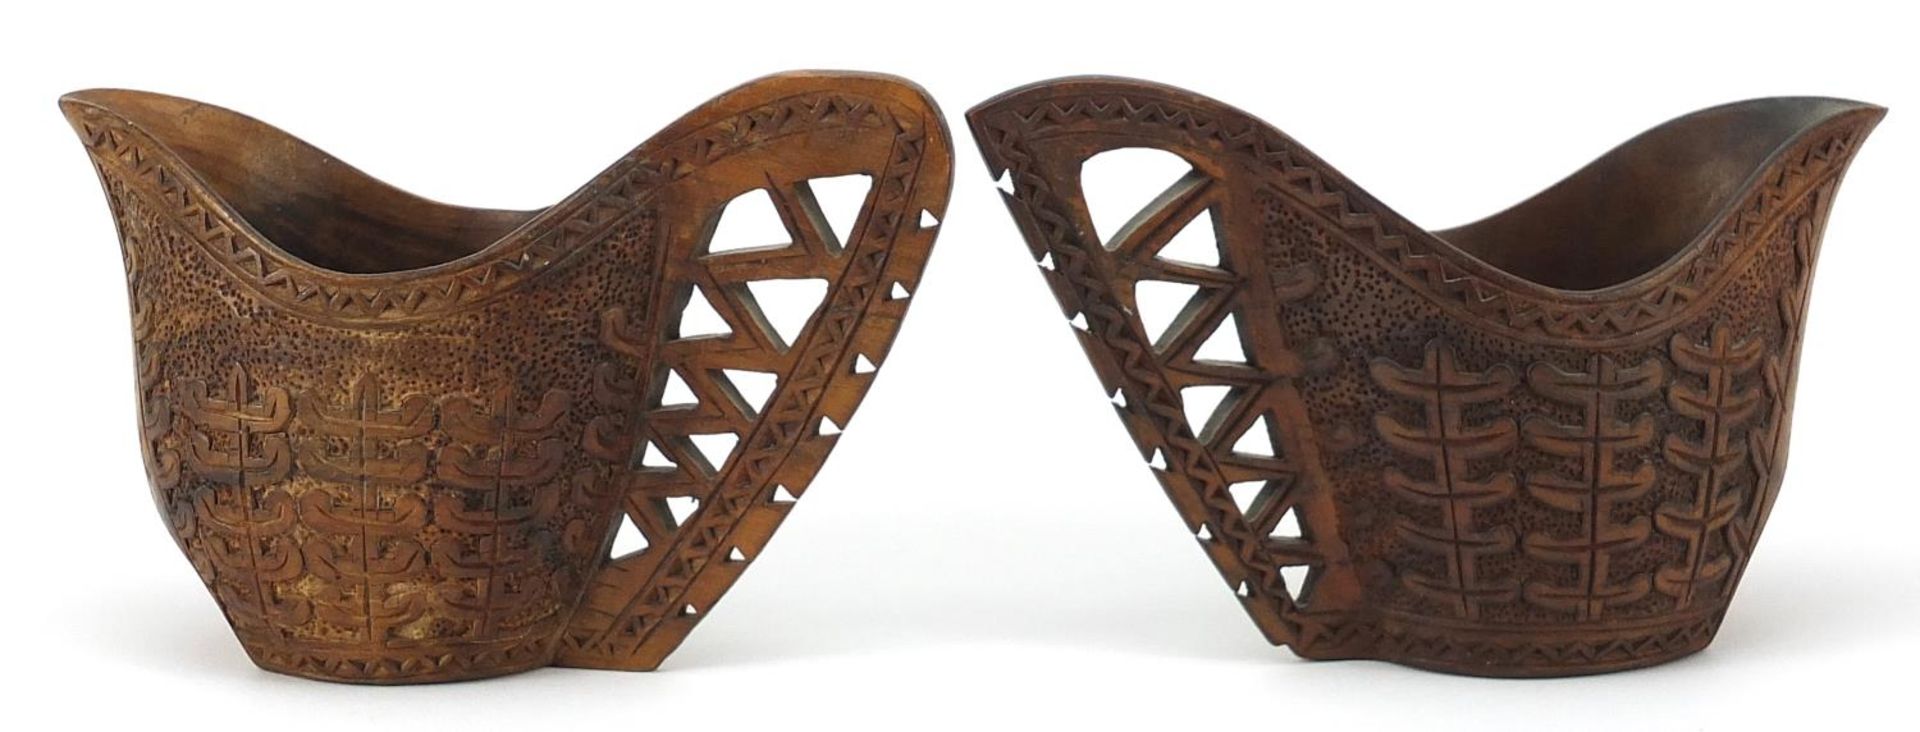 Pair of Scandinavian carved hardwood cups, the largest approximately 15.5cm - Image 2 of 3